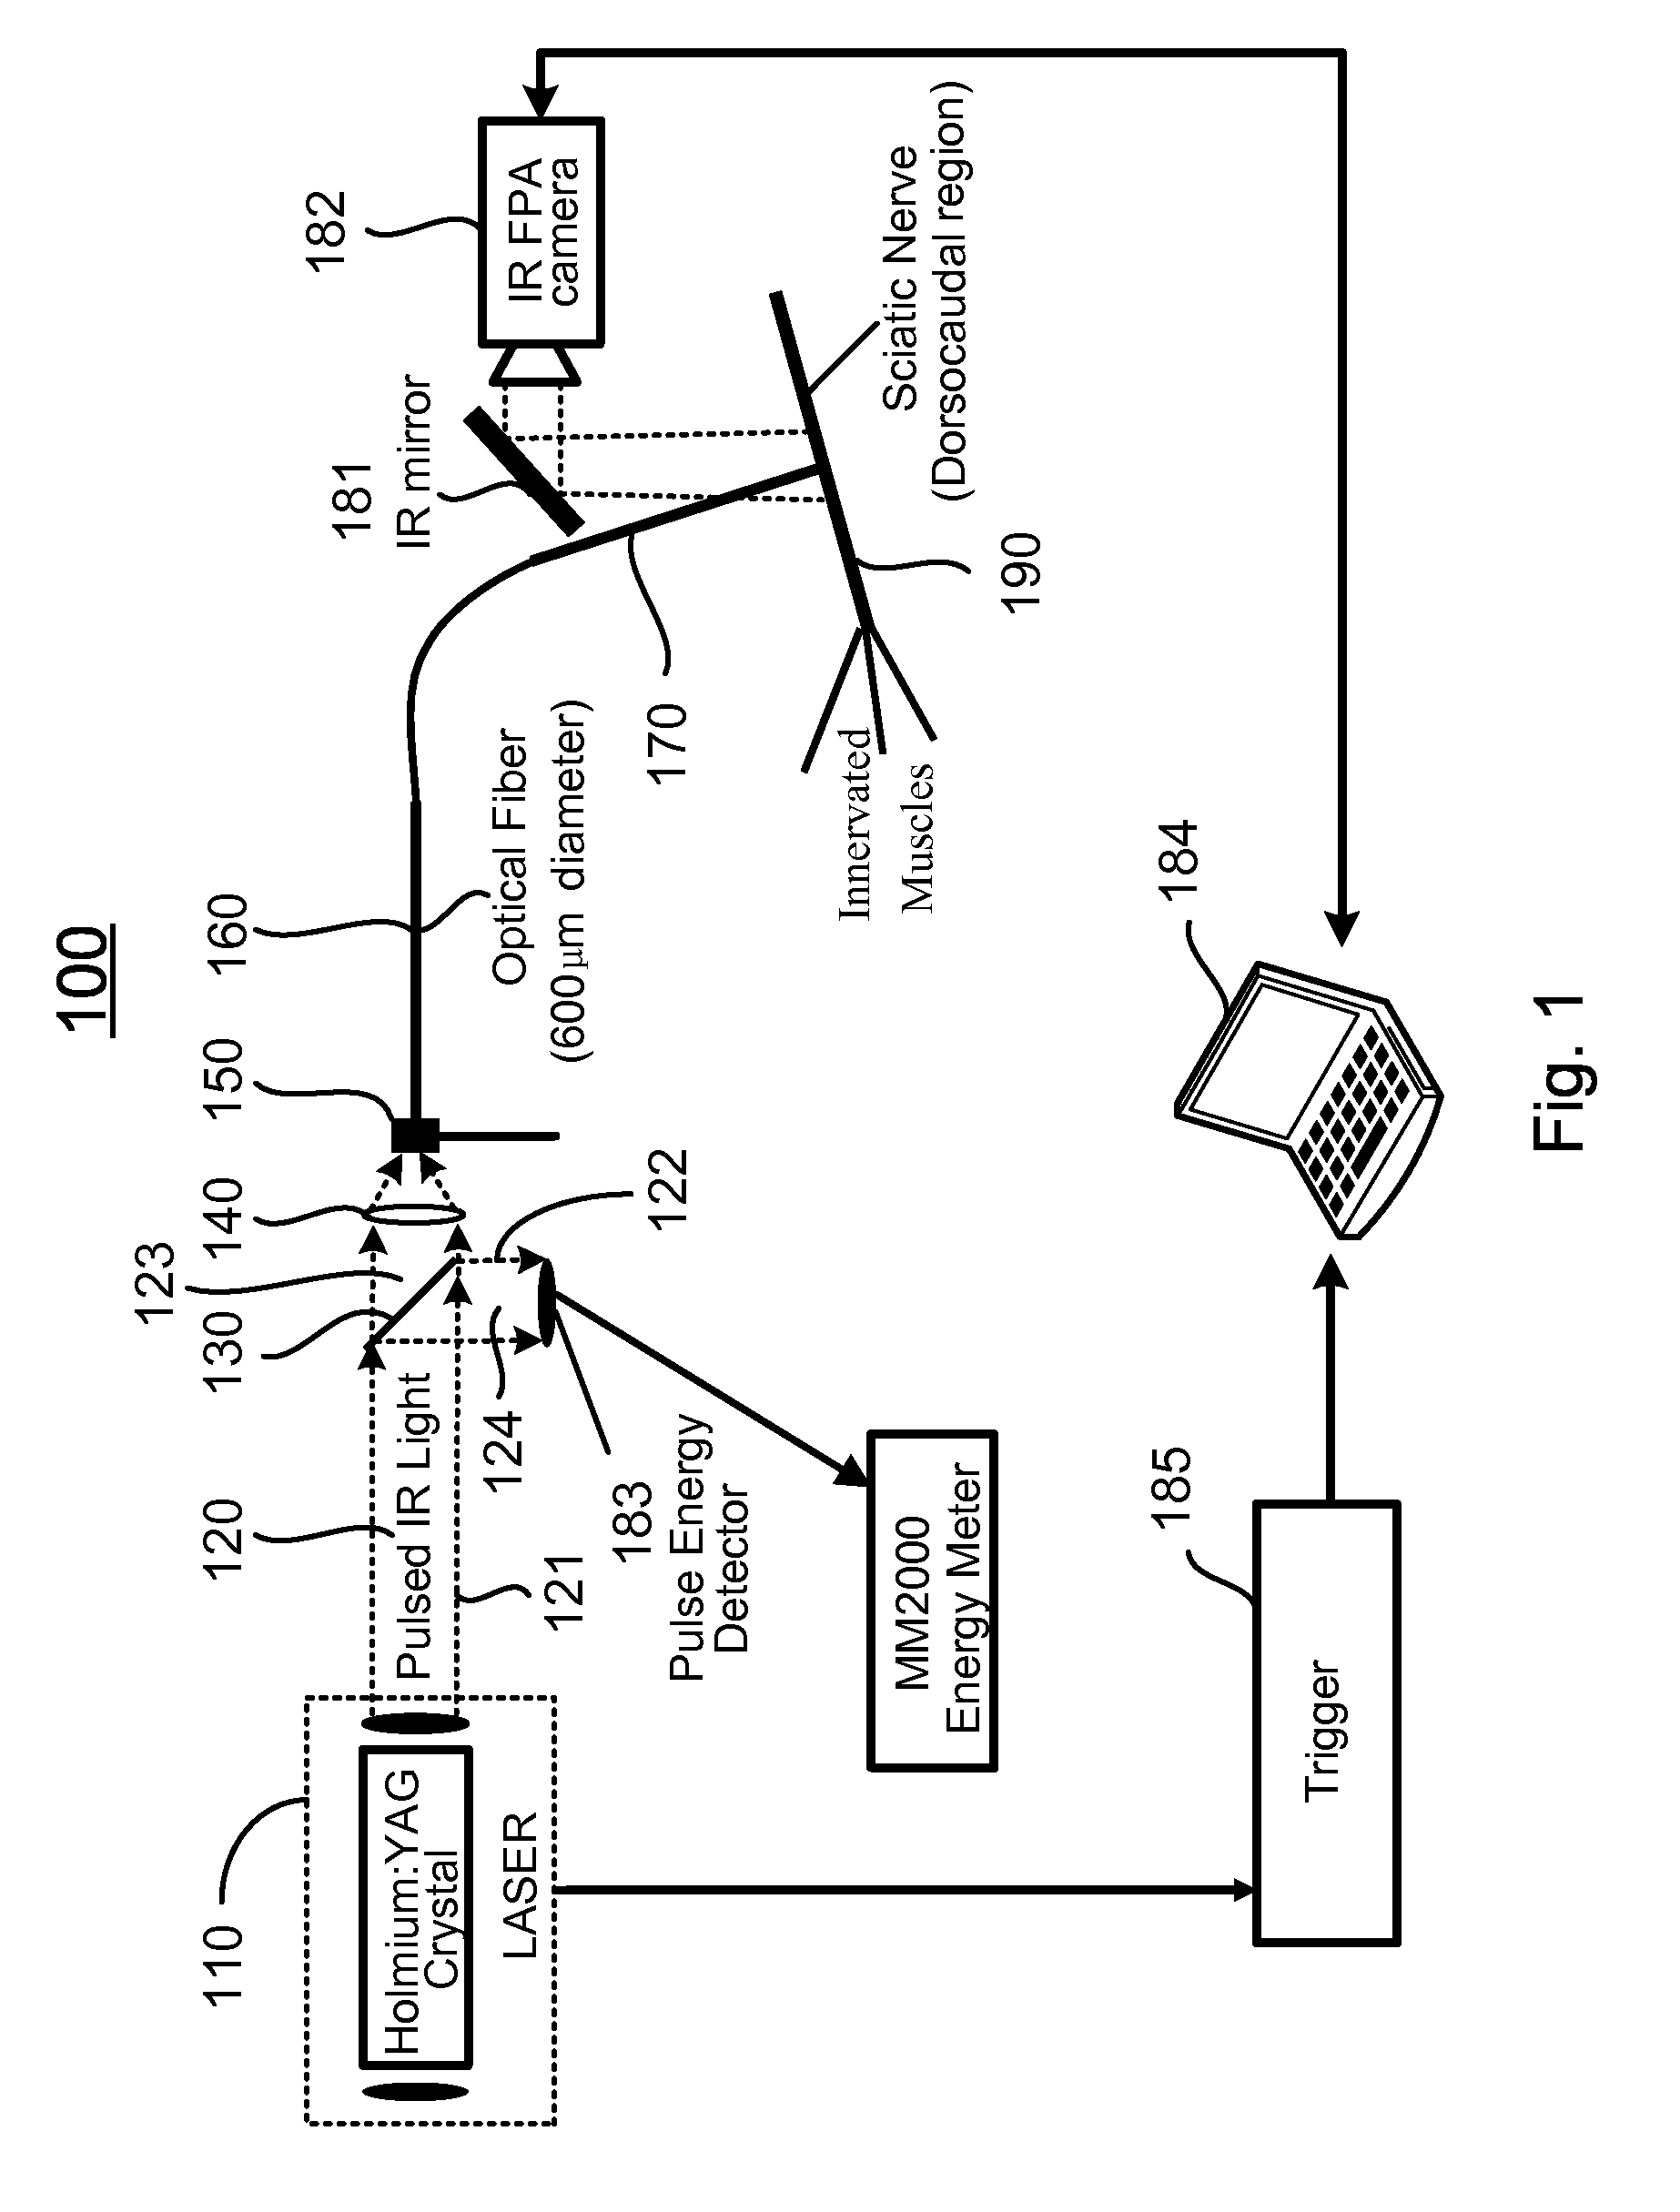 Apparatus and methods for optical stimulation of neural tissues